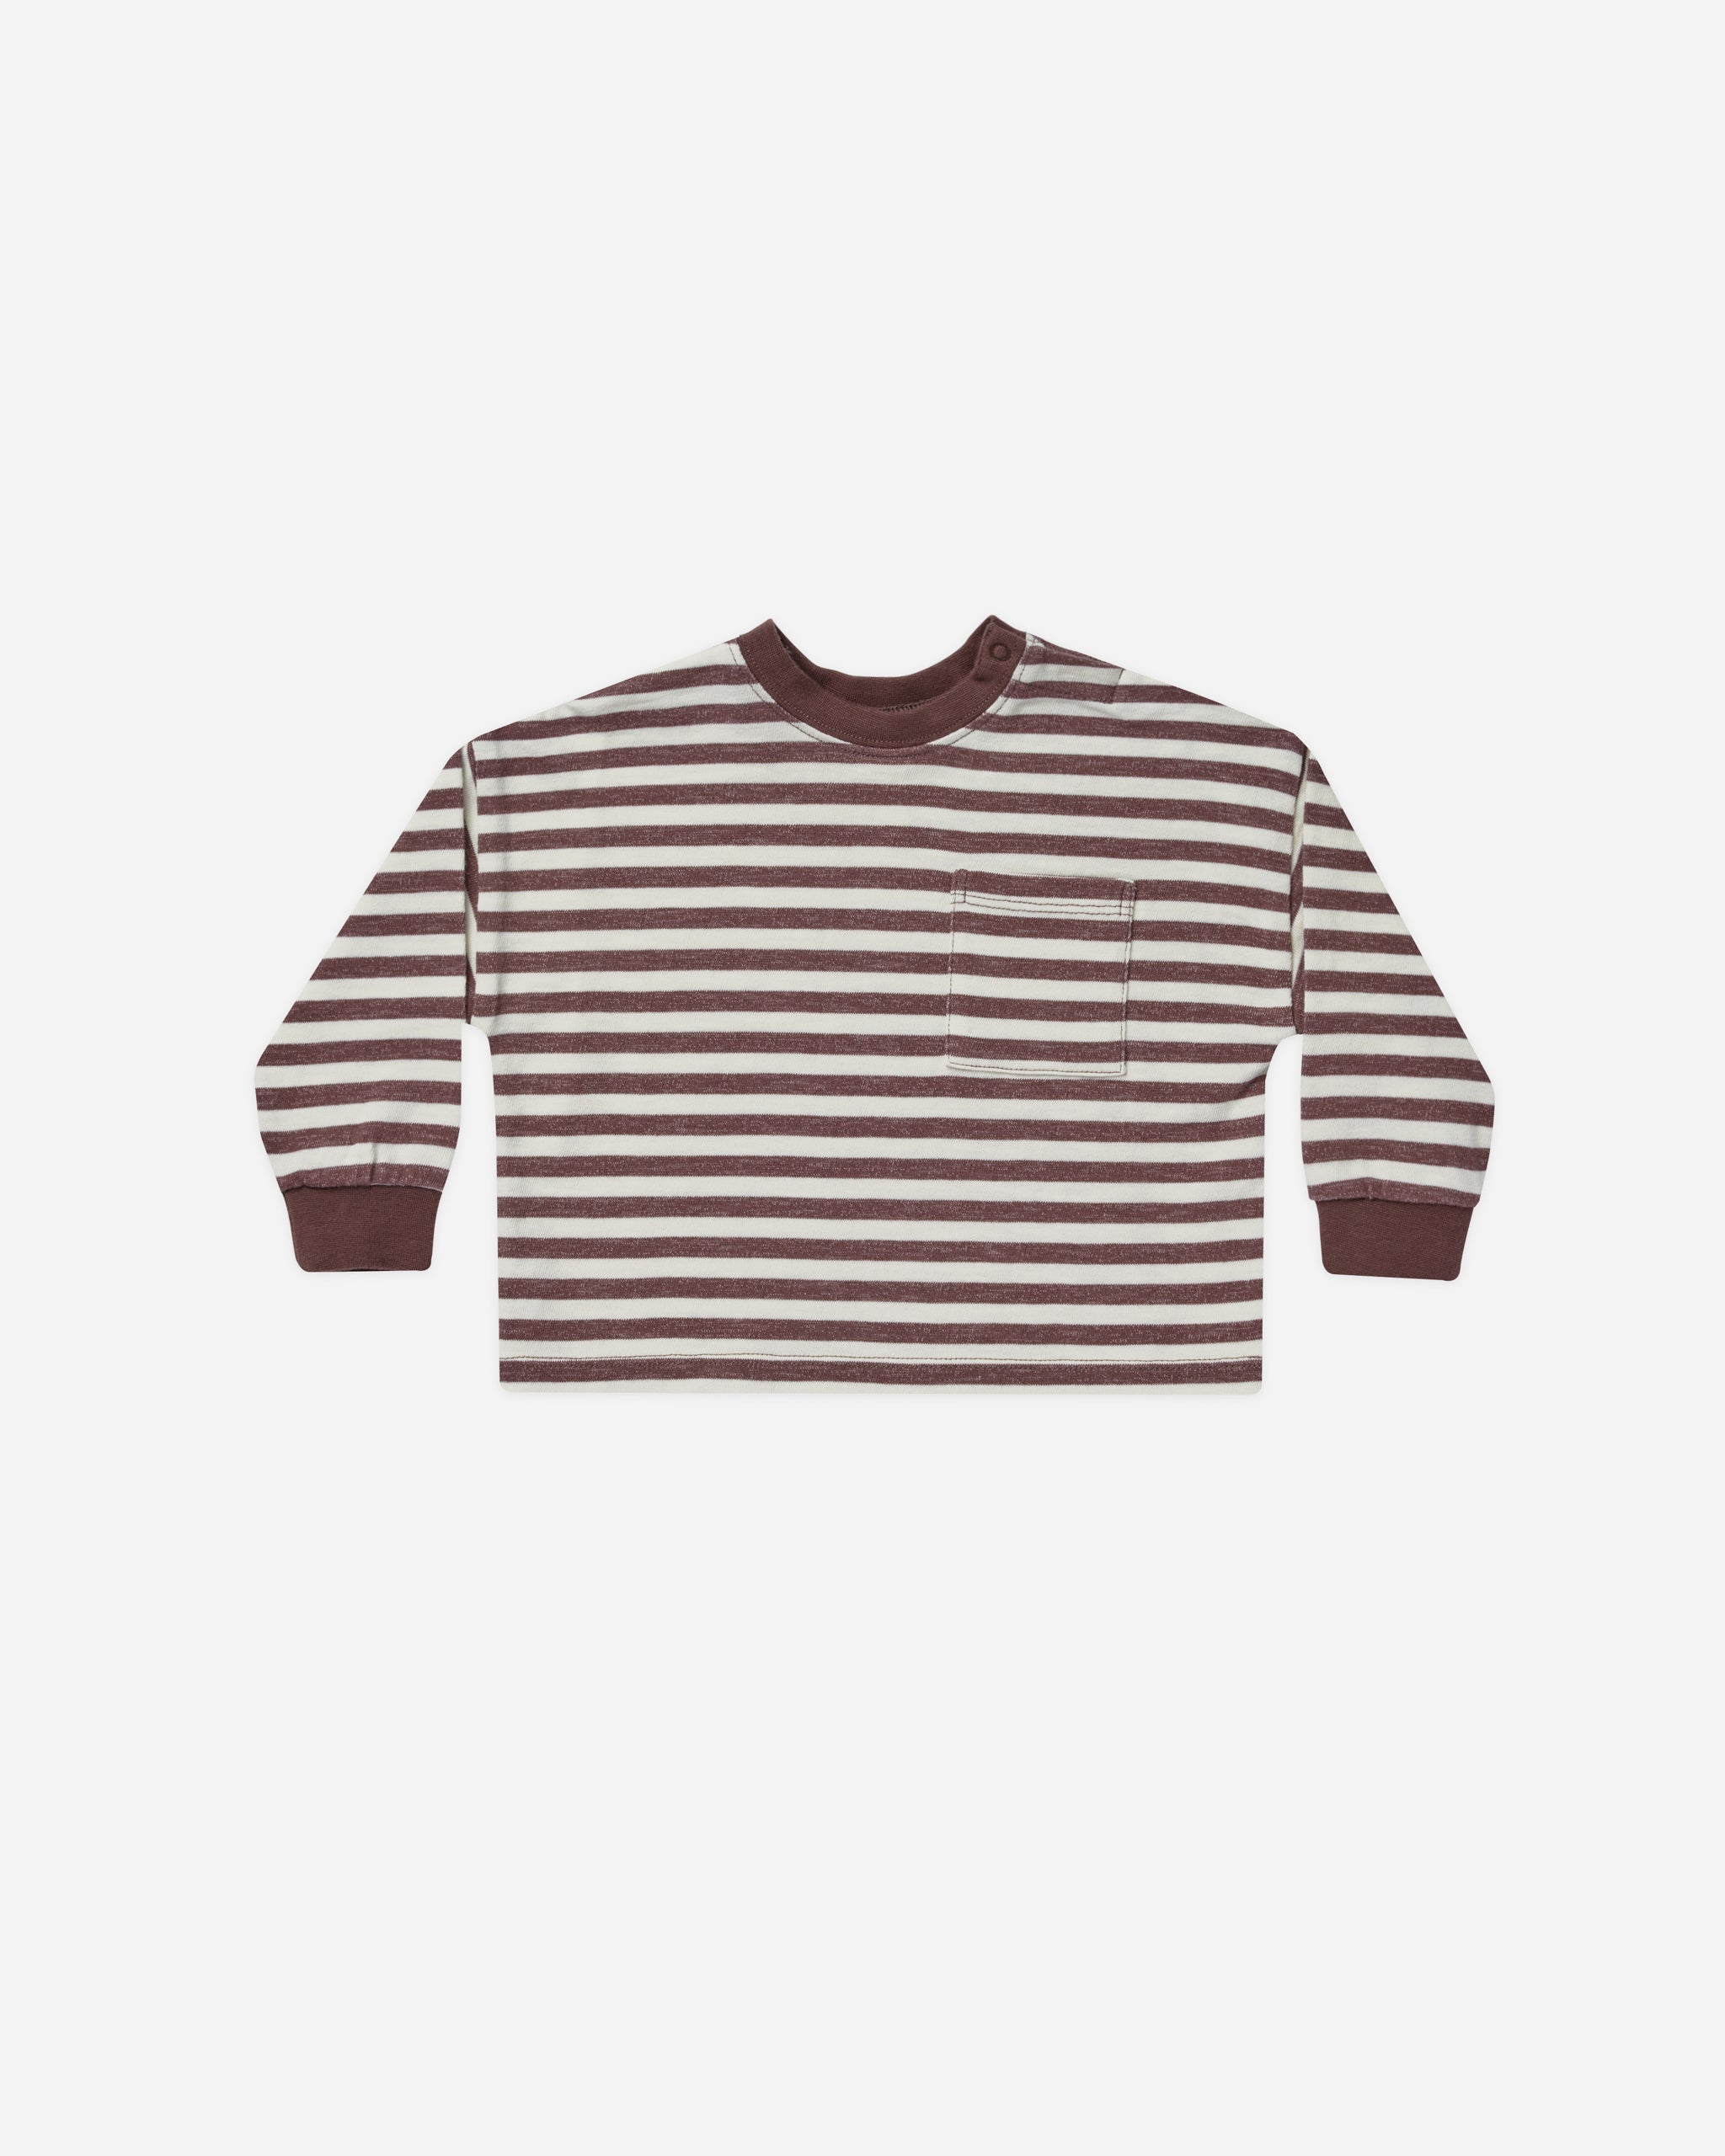 Relaxed Long Sleeve Tee || Plum Stripe - Rylee + Cru | Kids Clothes | Trendy Baby Clothes | Modern Infant Outfits |